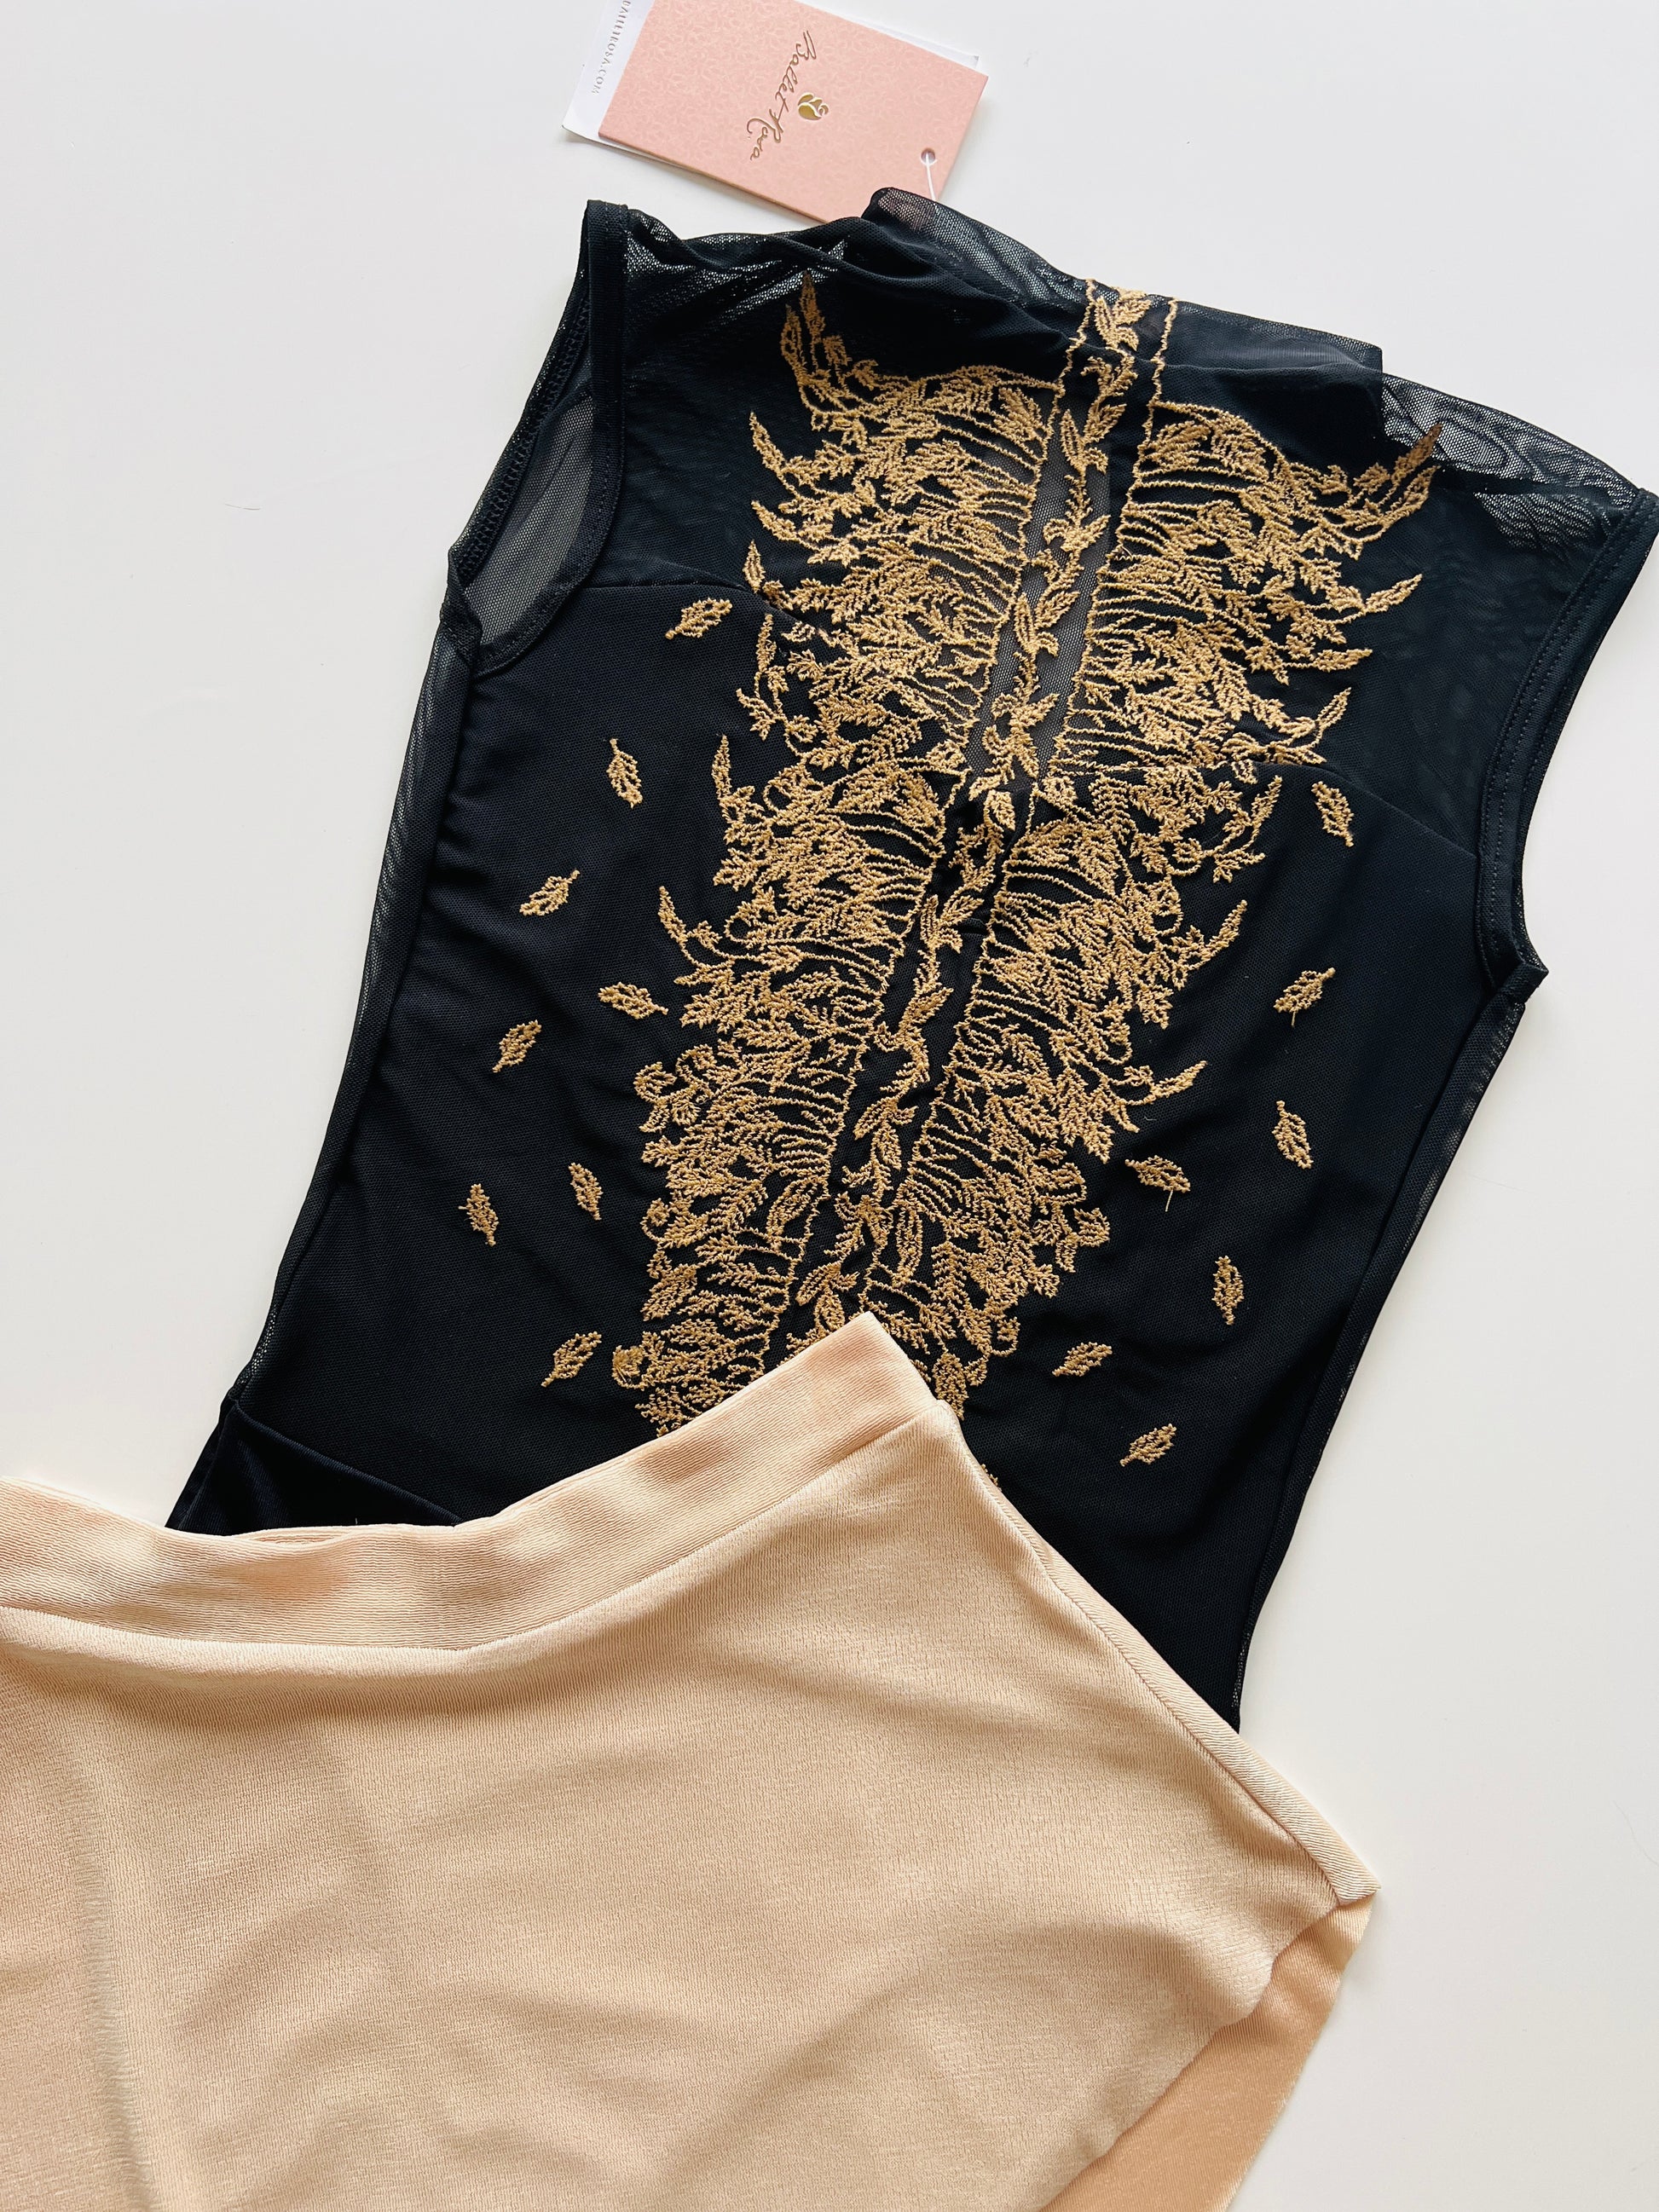 Harper leotard in gold with Bullet Pointe skirt in Drift from the Collective Dancewear